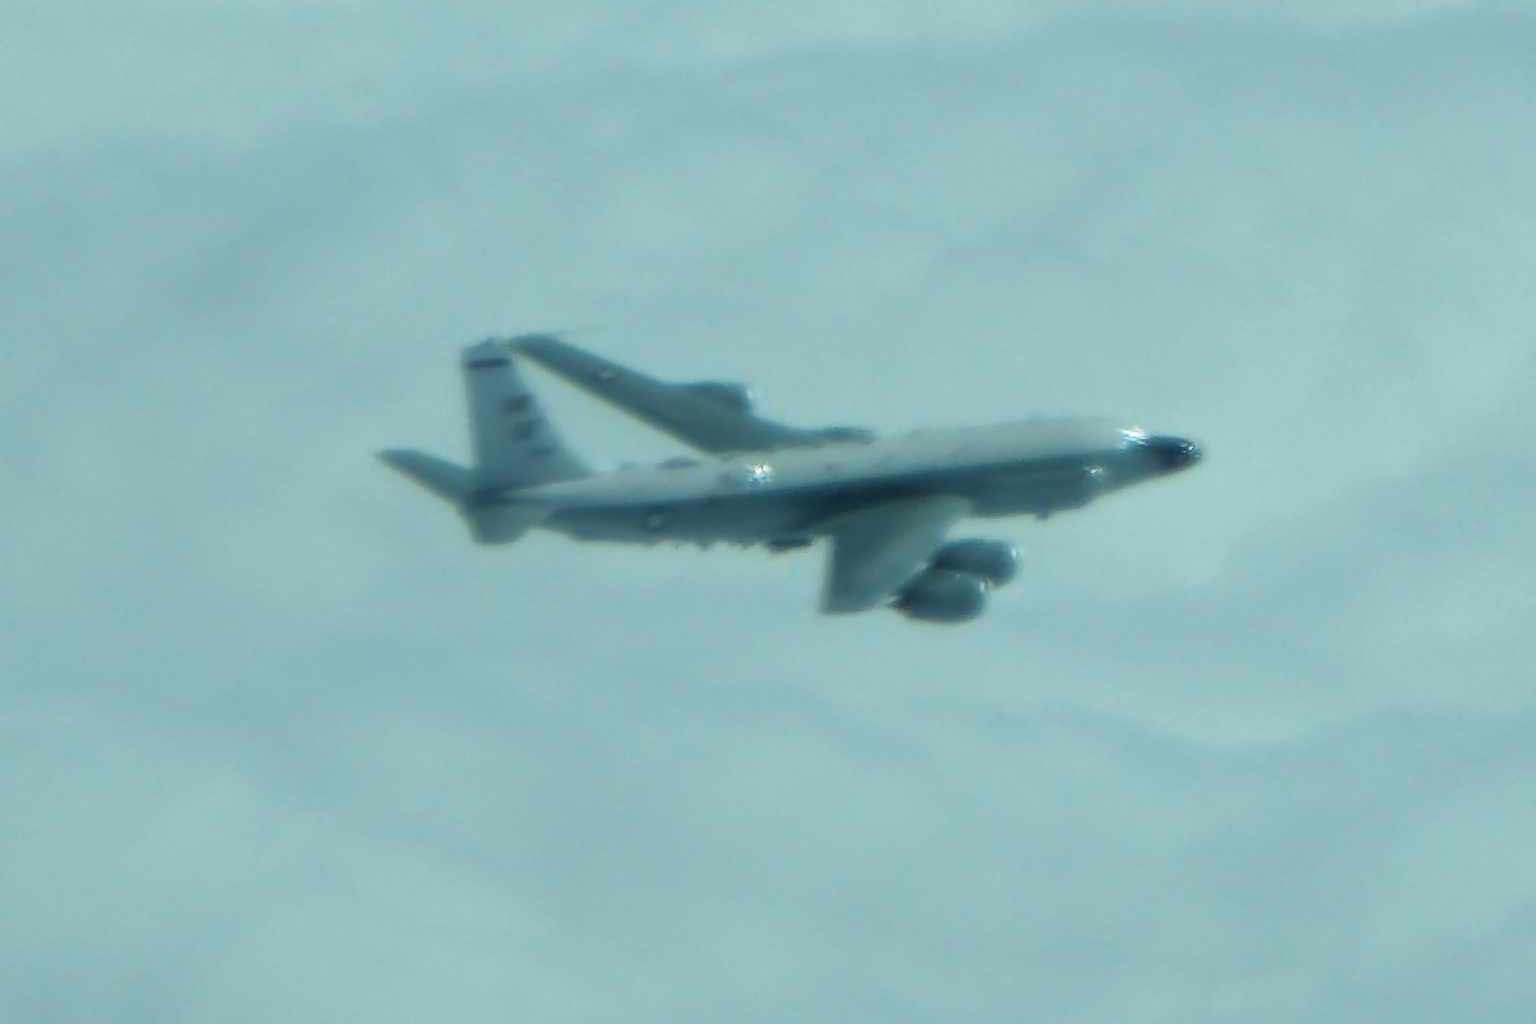 U.S. Air Force RC-135 Electronic Reconnaissance Aircraft Photographed in Taiwan Airspace